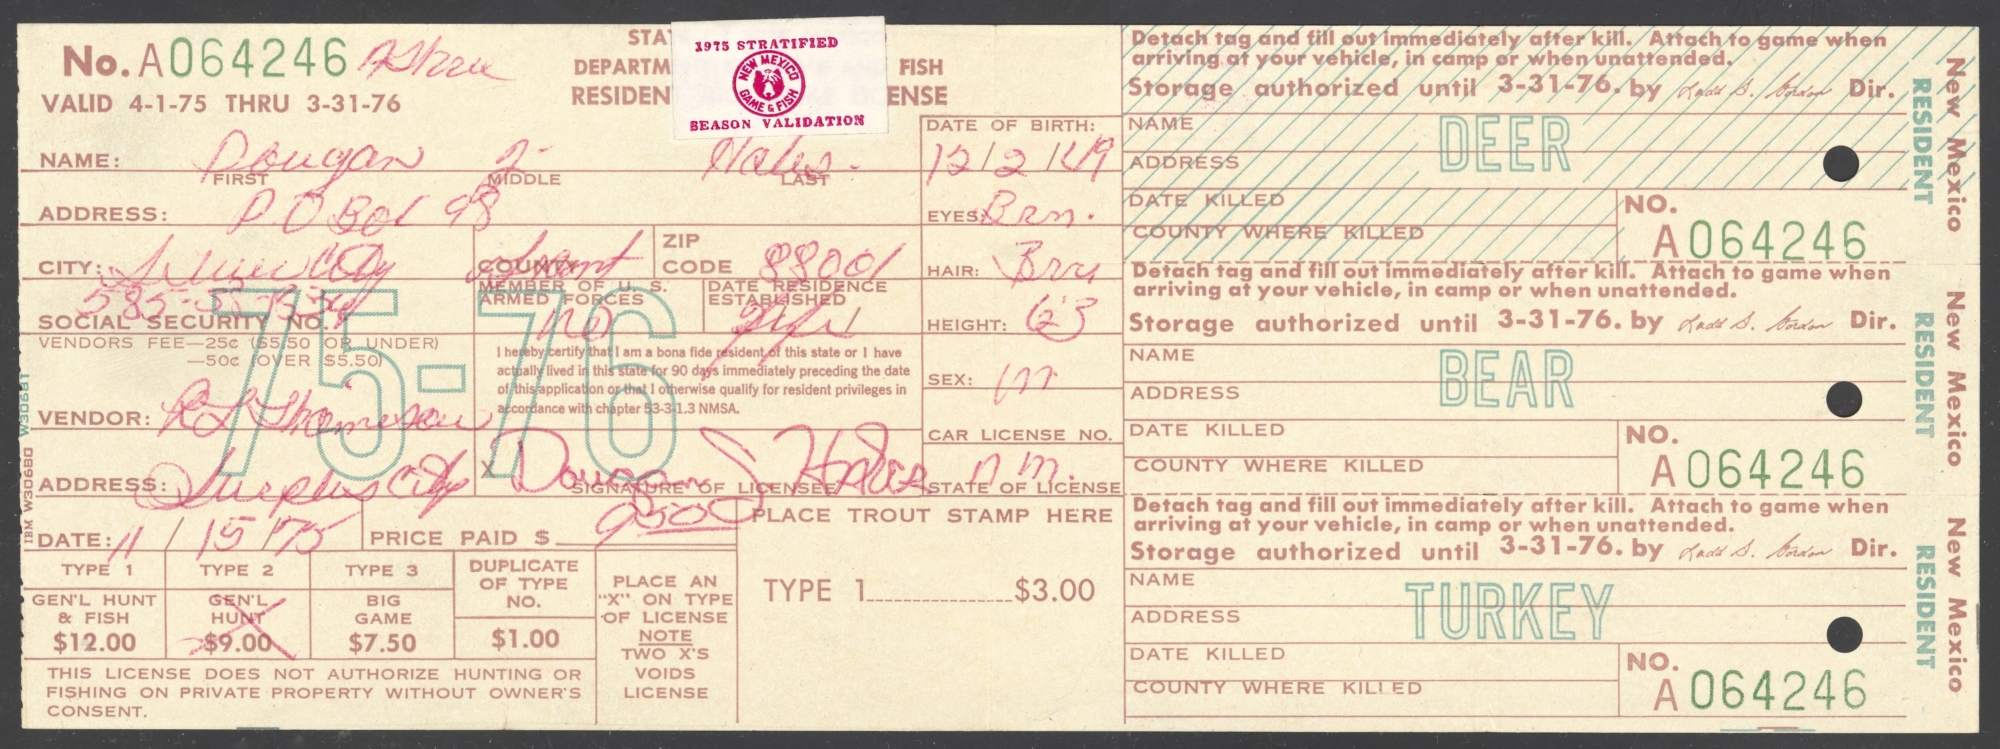 1975 New Mexico Stratified Season used on 1975-76 license